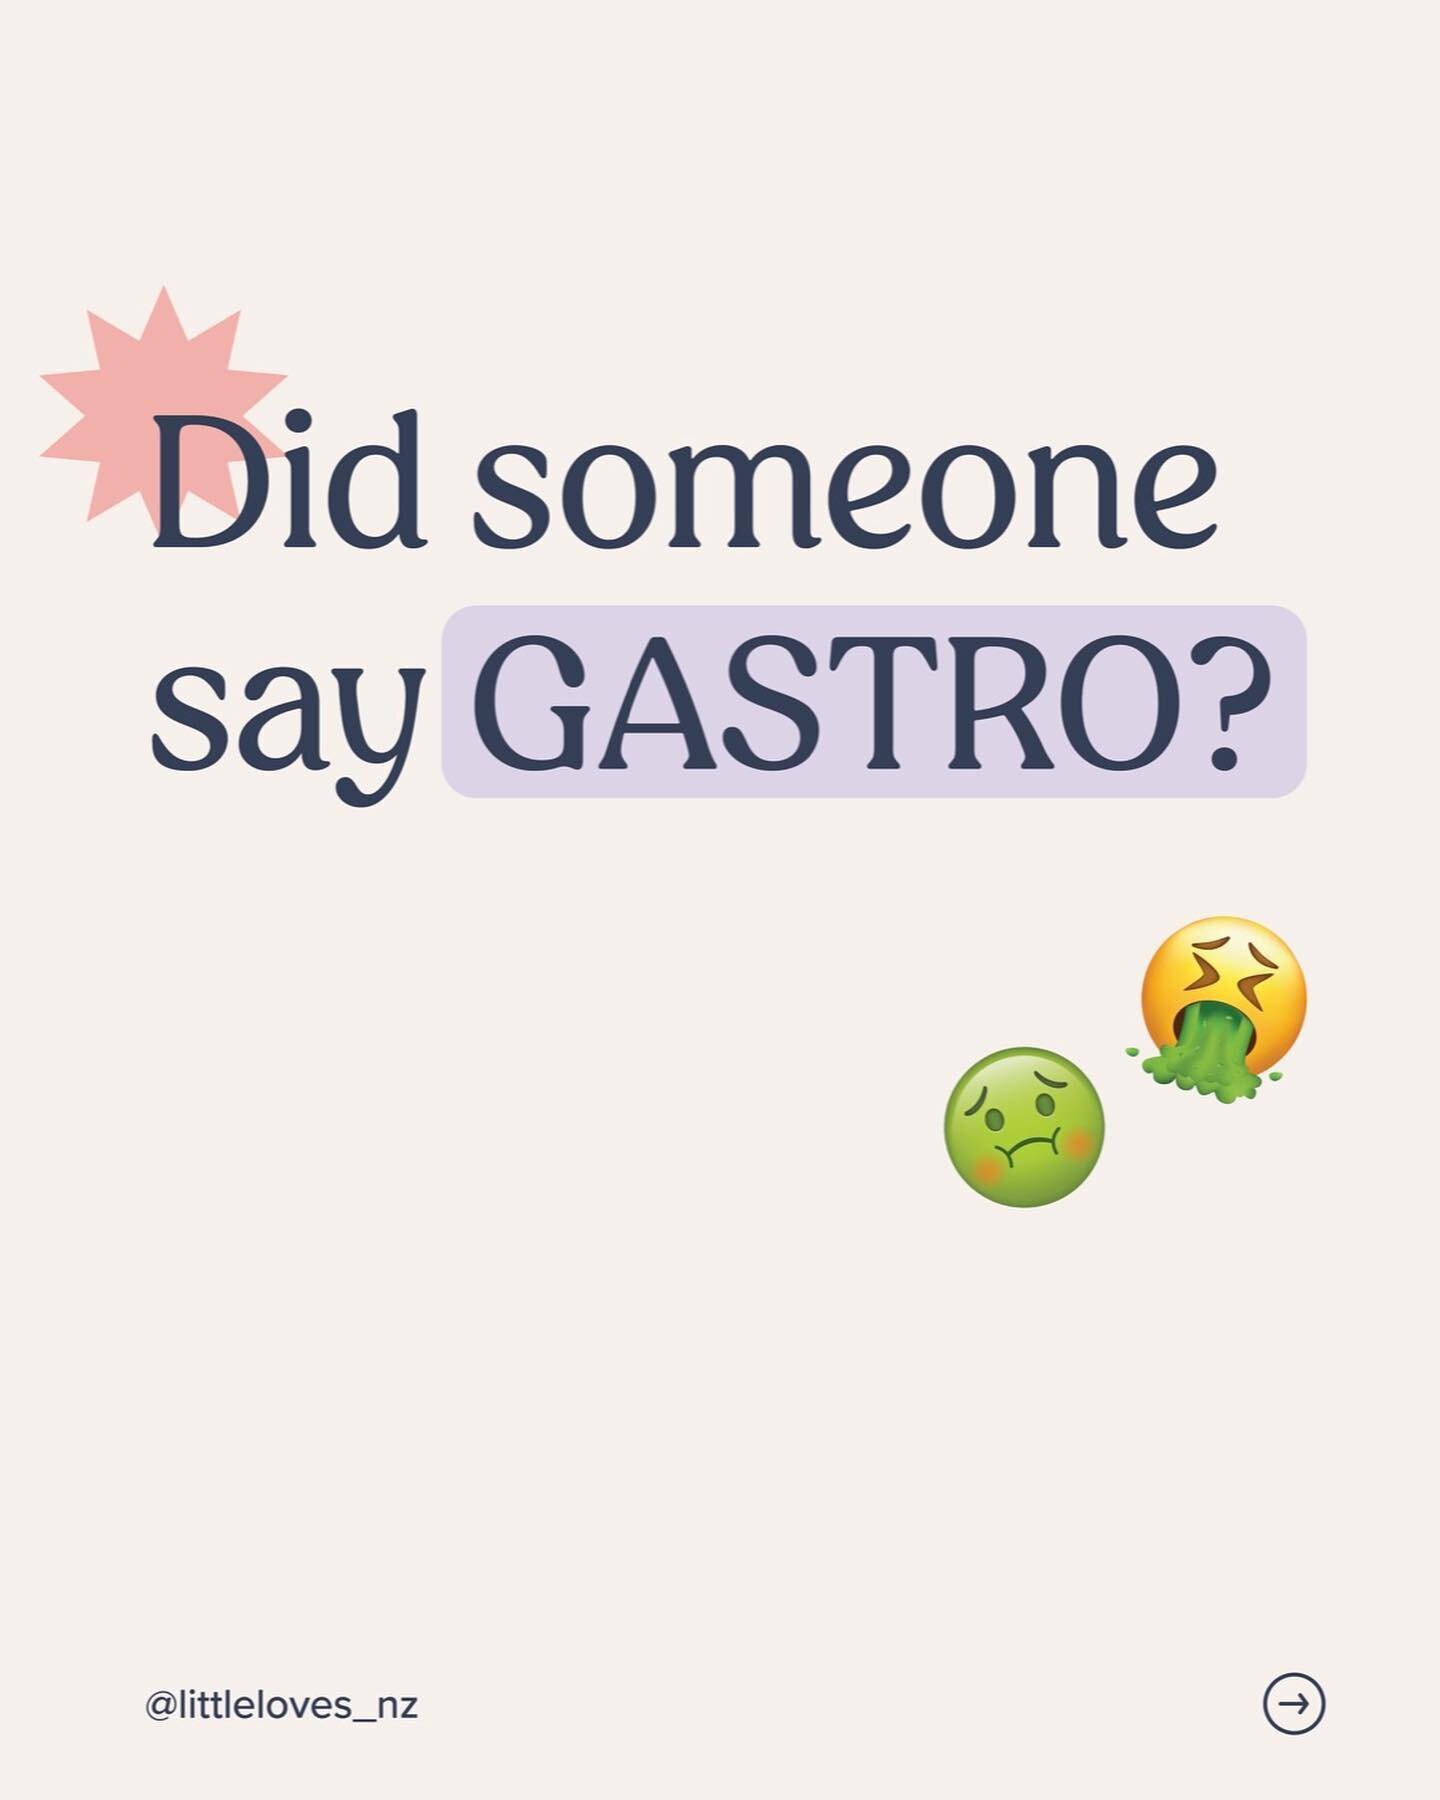 As we know (or may not), gastro is doing the rounds through our community again. 

Trying to prevent this illness from spreading can sometimes feel like you&rsquo;re fighting a losing battle.
Hand washing &amp; thorough cleans between &lsquo;accident